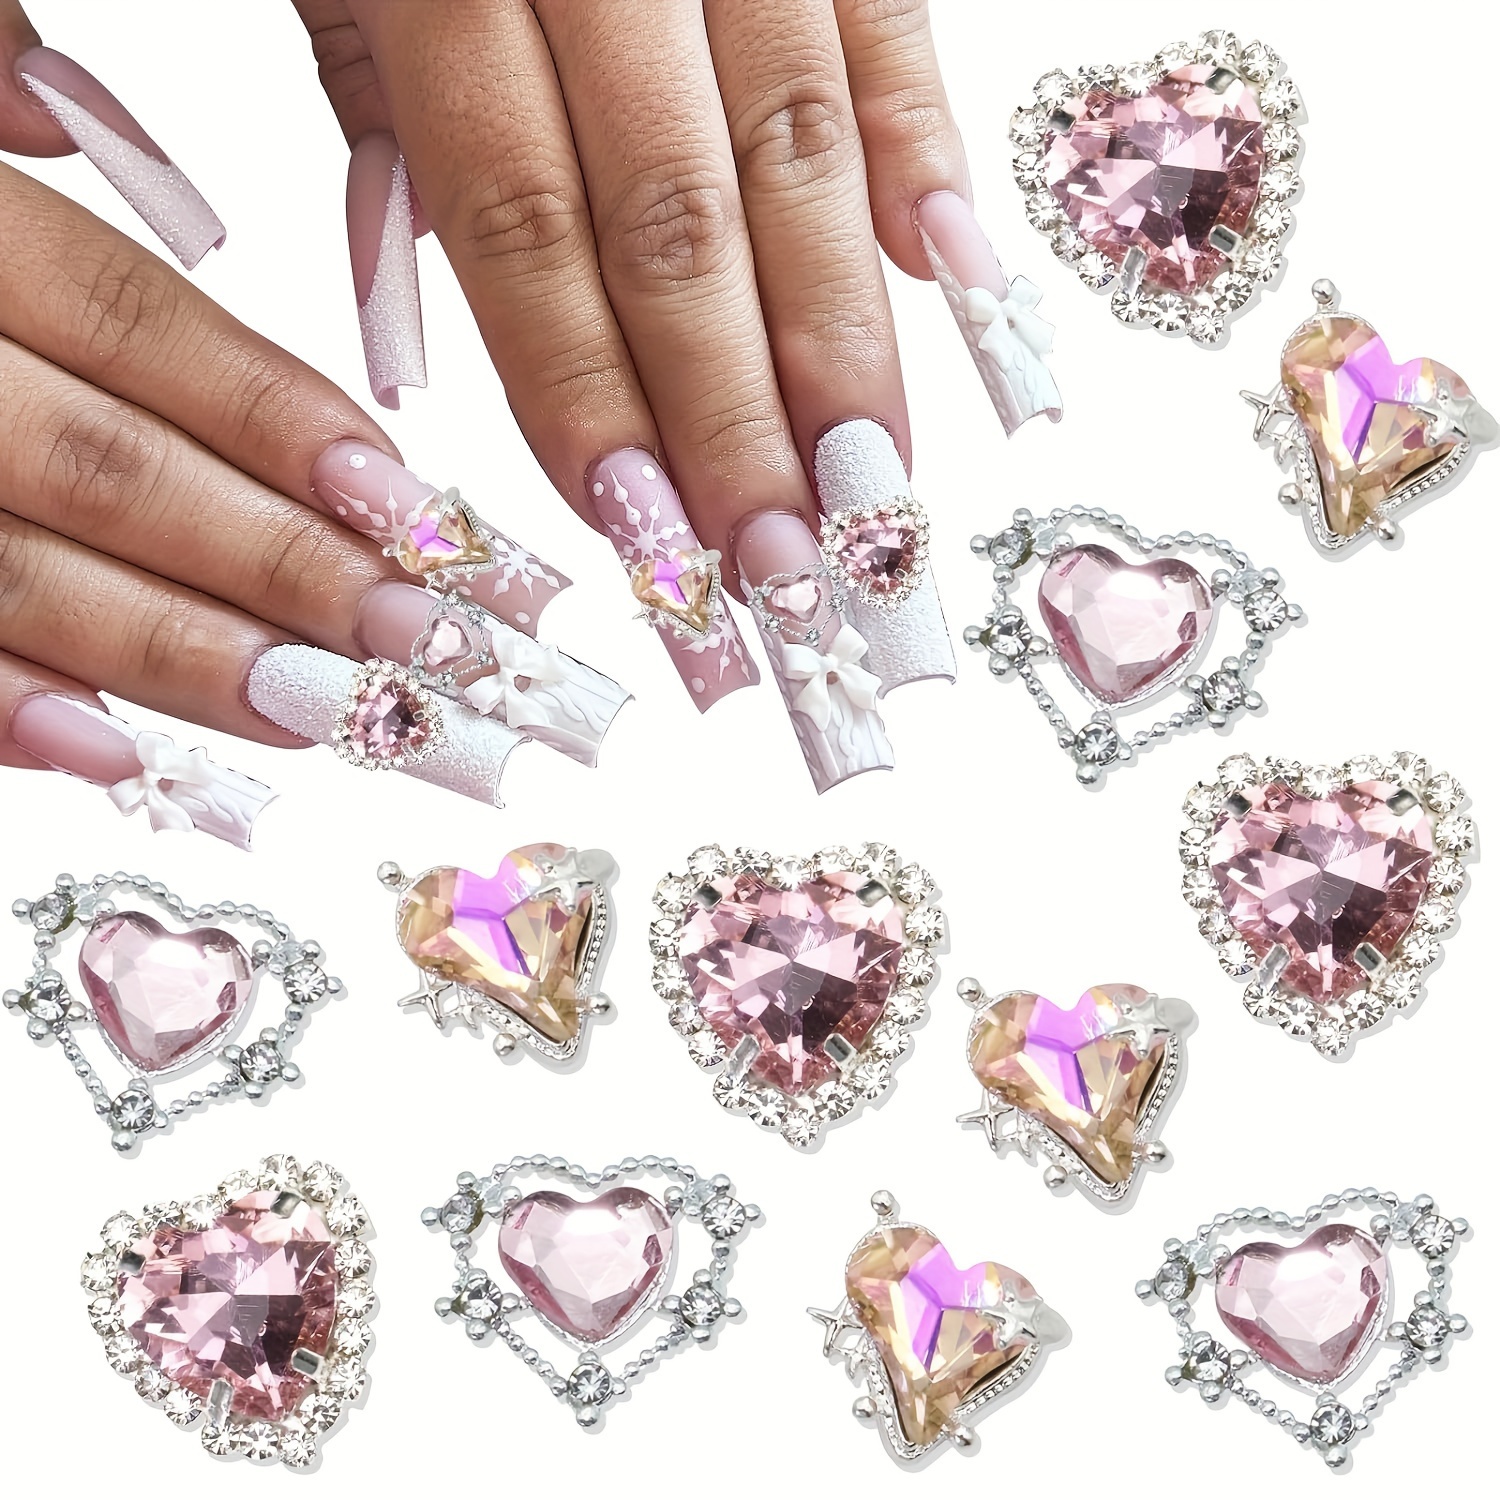 

60pcs Heart Nail Charms 3d Pink Crystal Rhinestones Nail Charms 3 Styles Shiny Flatback Nail Gems For Nail Art And Diy Crafts Jewelry Decoration